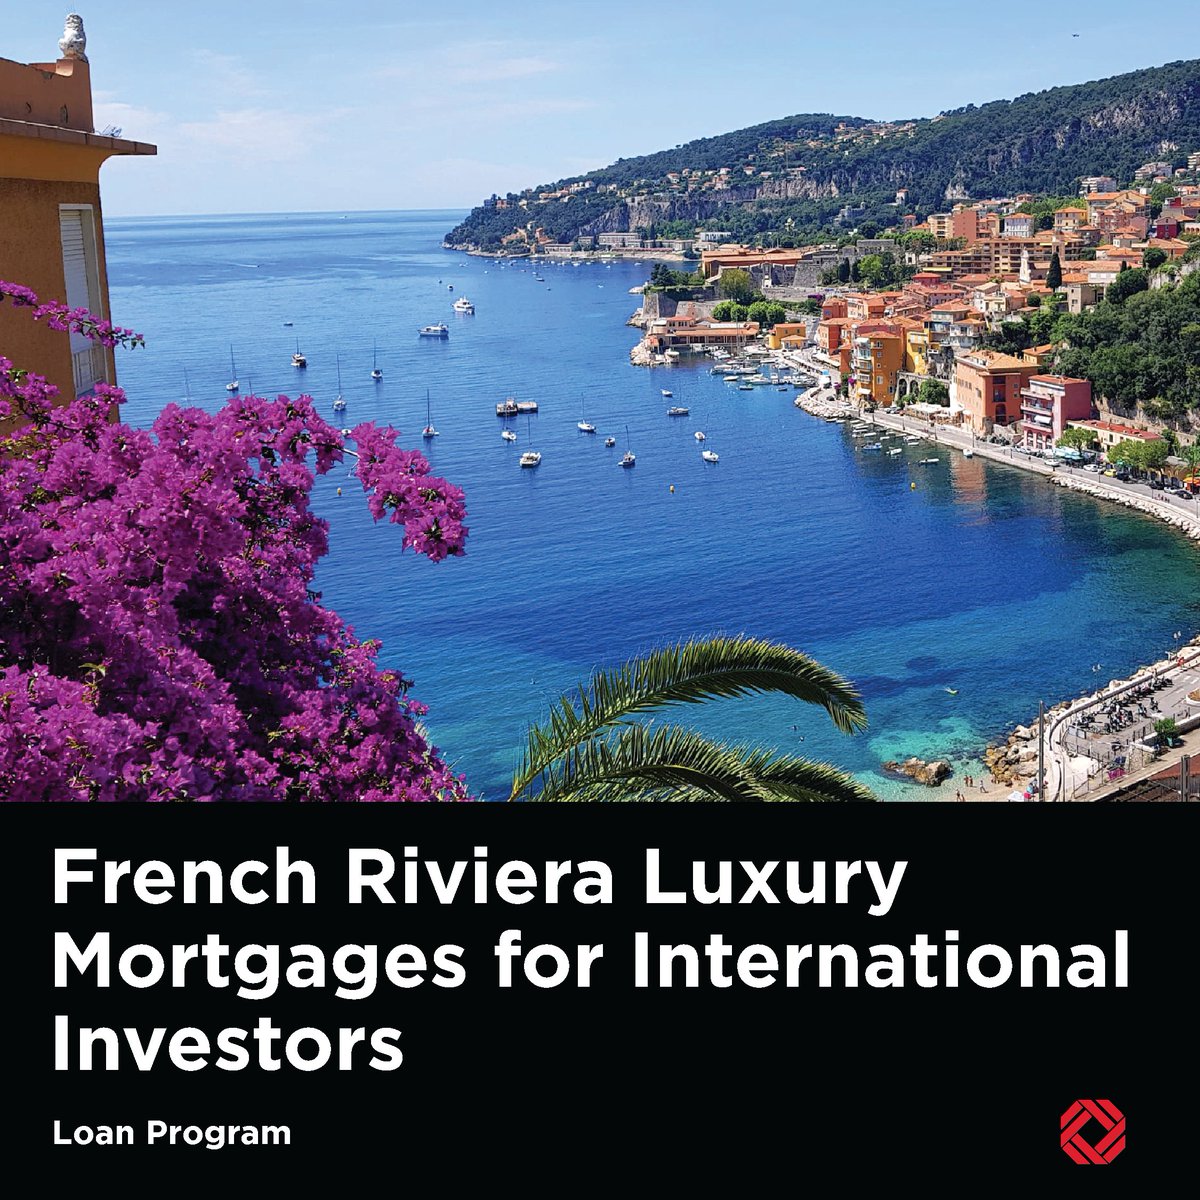 Exploring property investments in France? Cities like Toulouse and Lyon offer solid growth. Our experts offer French bank and private lending solutions for our global clients.

hello@gmg.asia
.
.
#frenchriveria #france #cotedazur #mediterranean #southoffrance #france #realestate